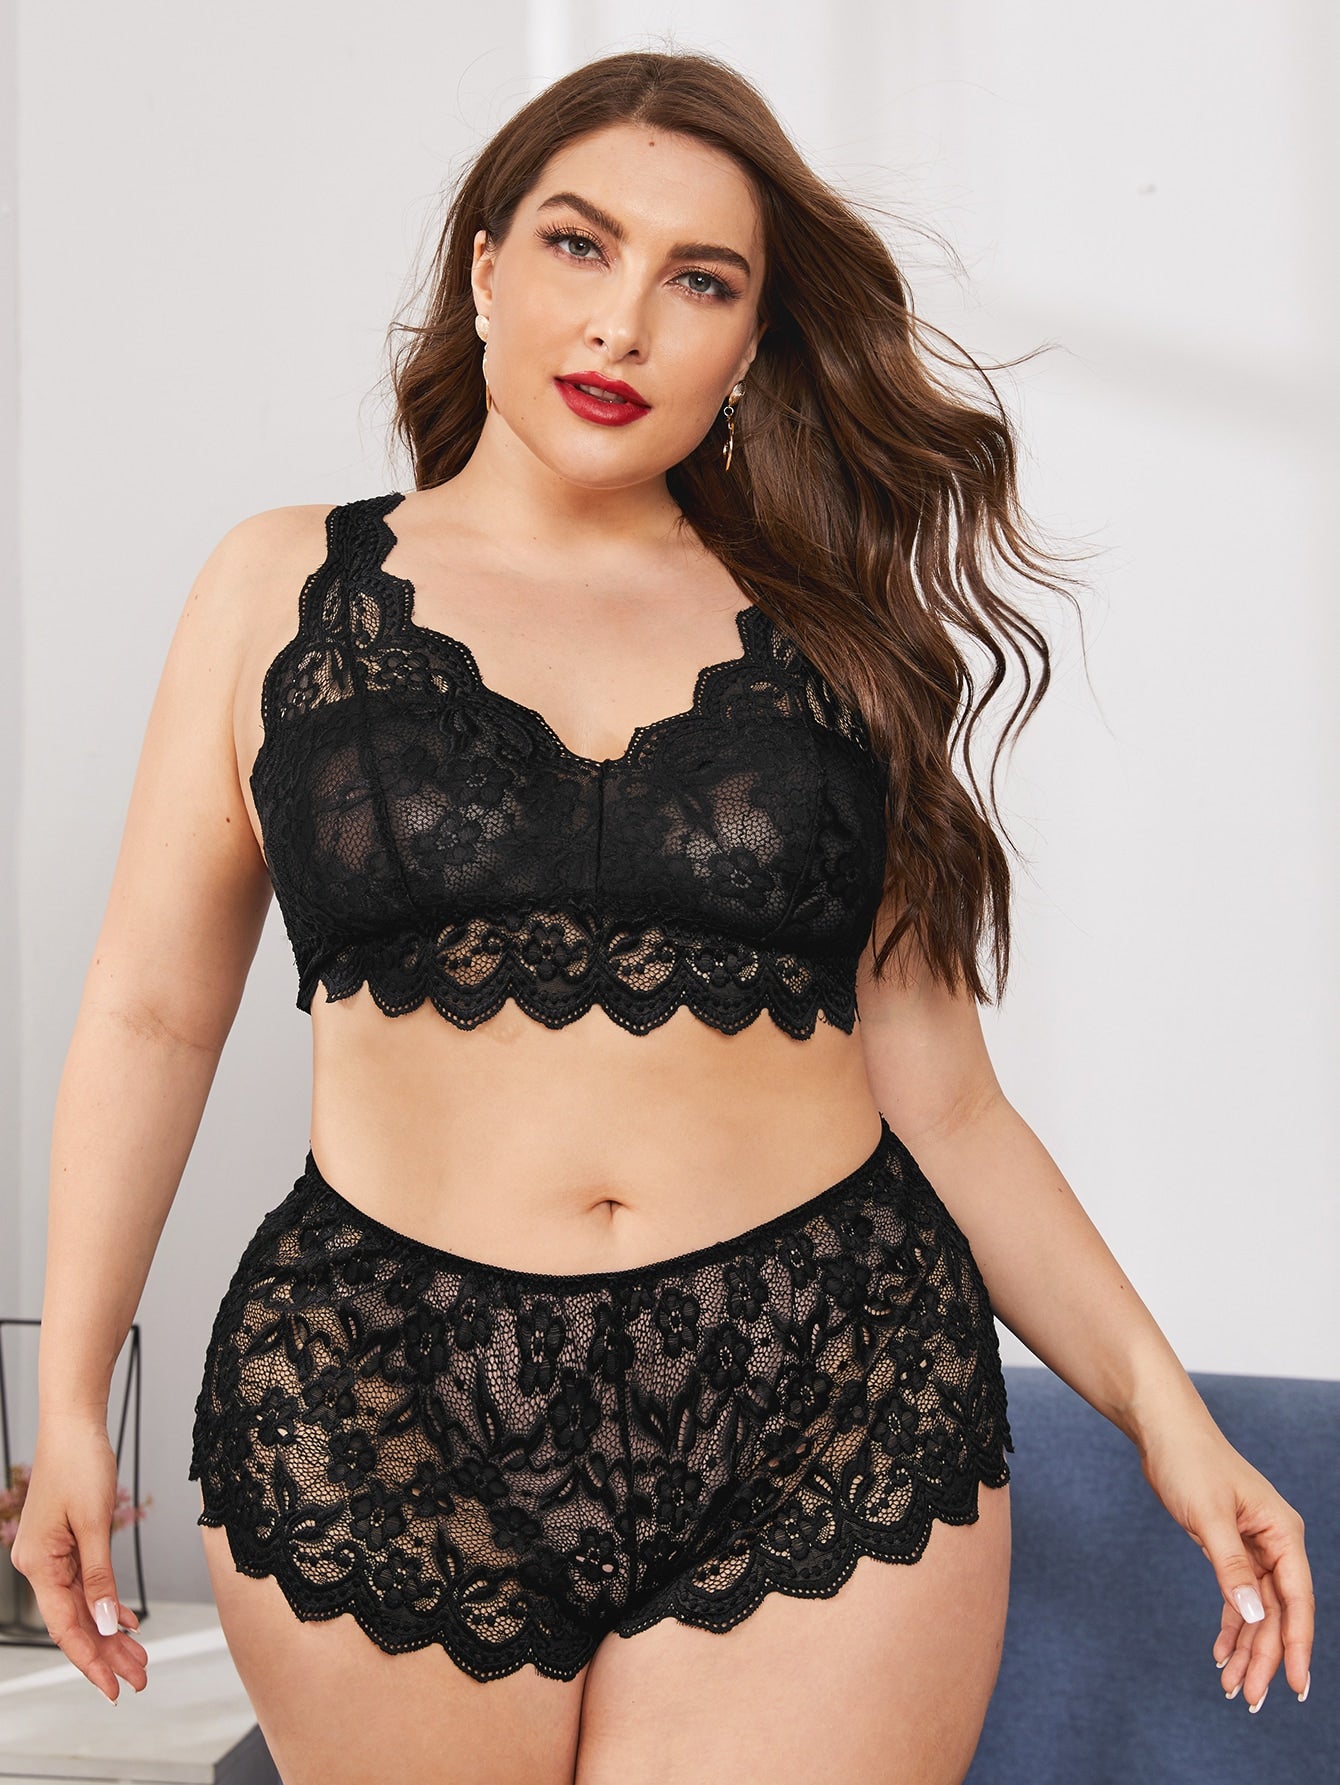 Plus Size Women's Black Lingerie Set With Scallop Edge, Bra And